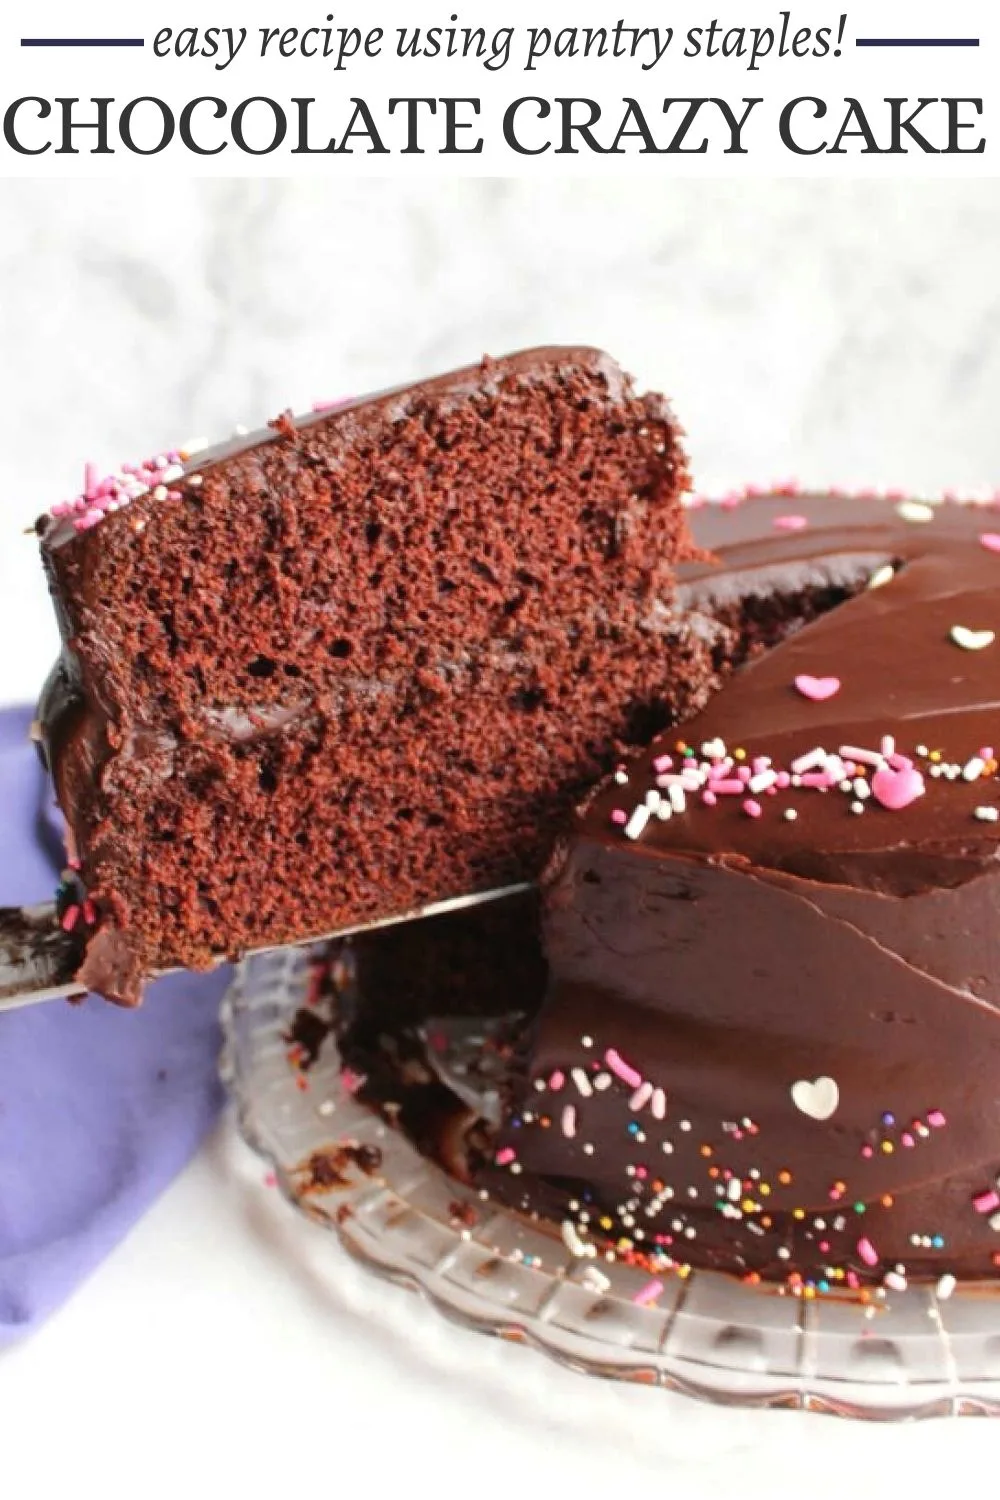 This old fashioned chocolate depression cake recipe was developed during the Great Depression when it was hard to get eggs and butter. The cake is loaded with chocolate flavor and it is super tender and moist. It is our favorite chocolate cake recipe.